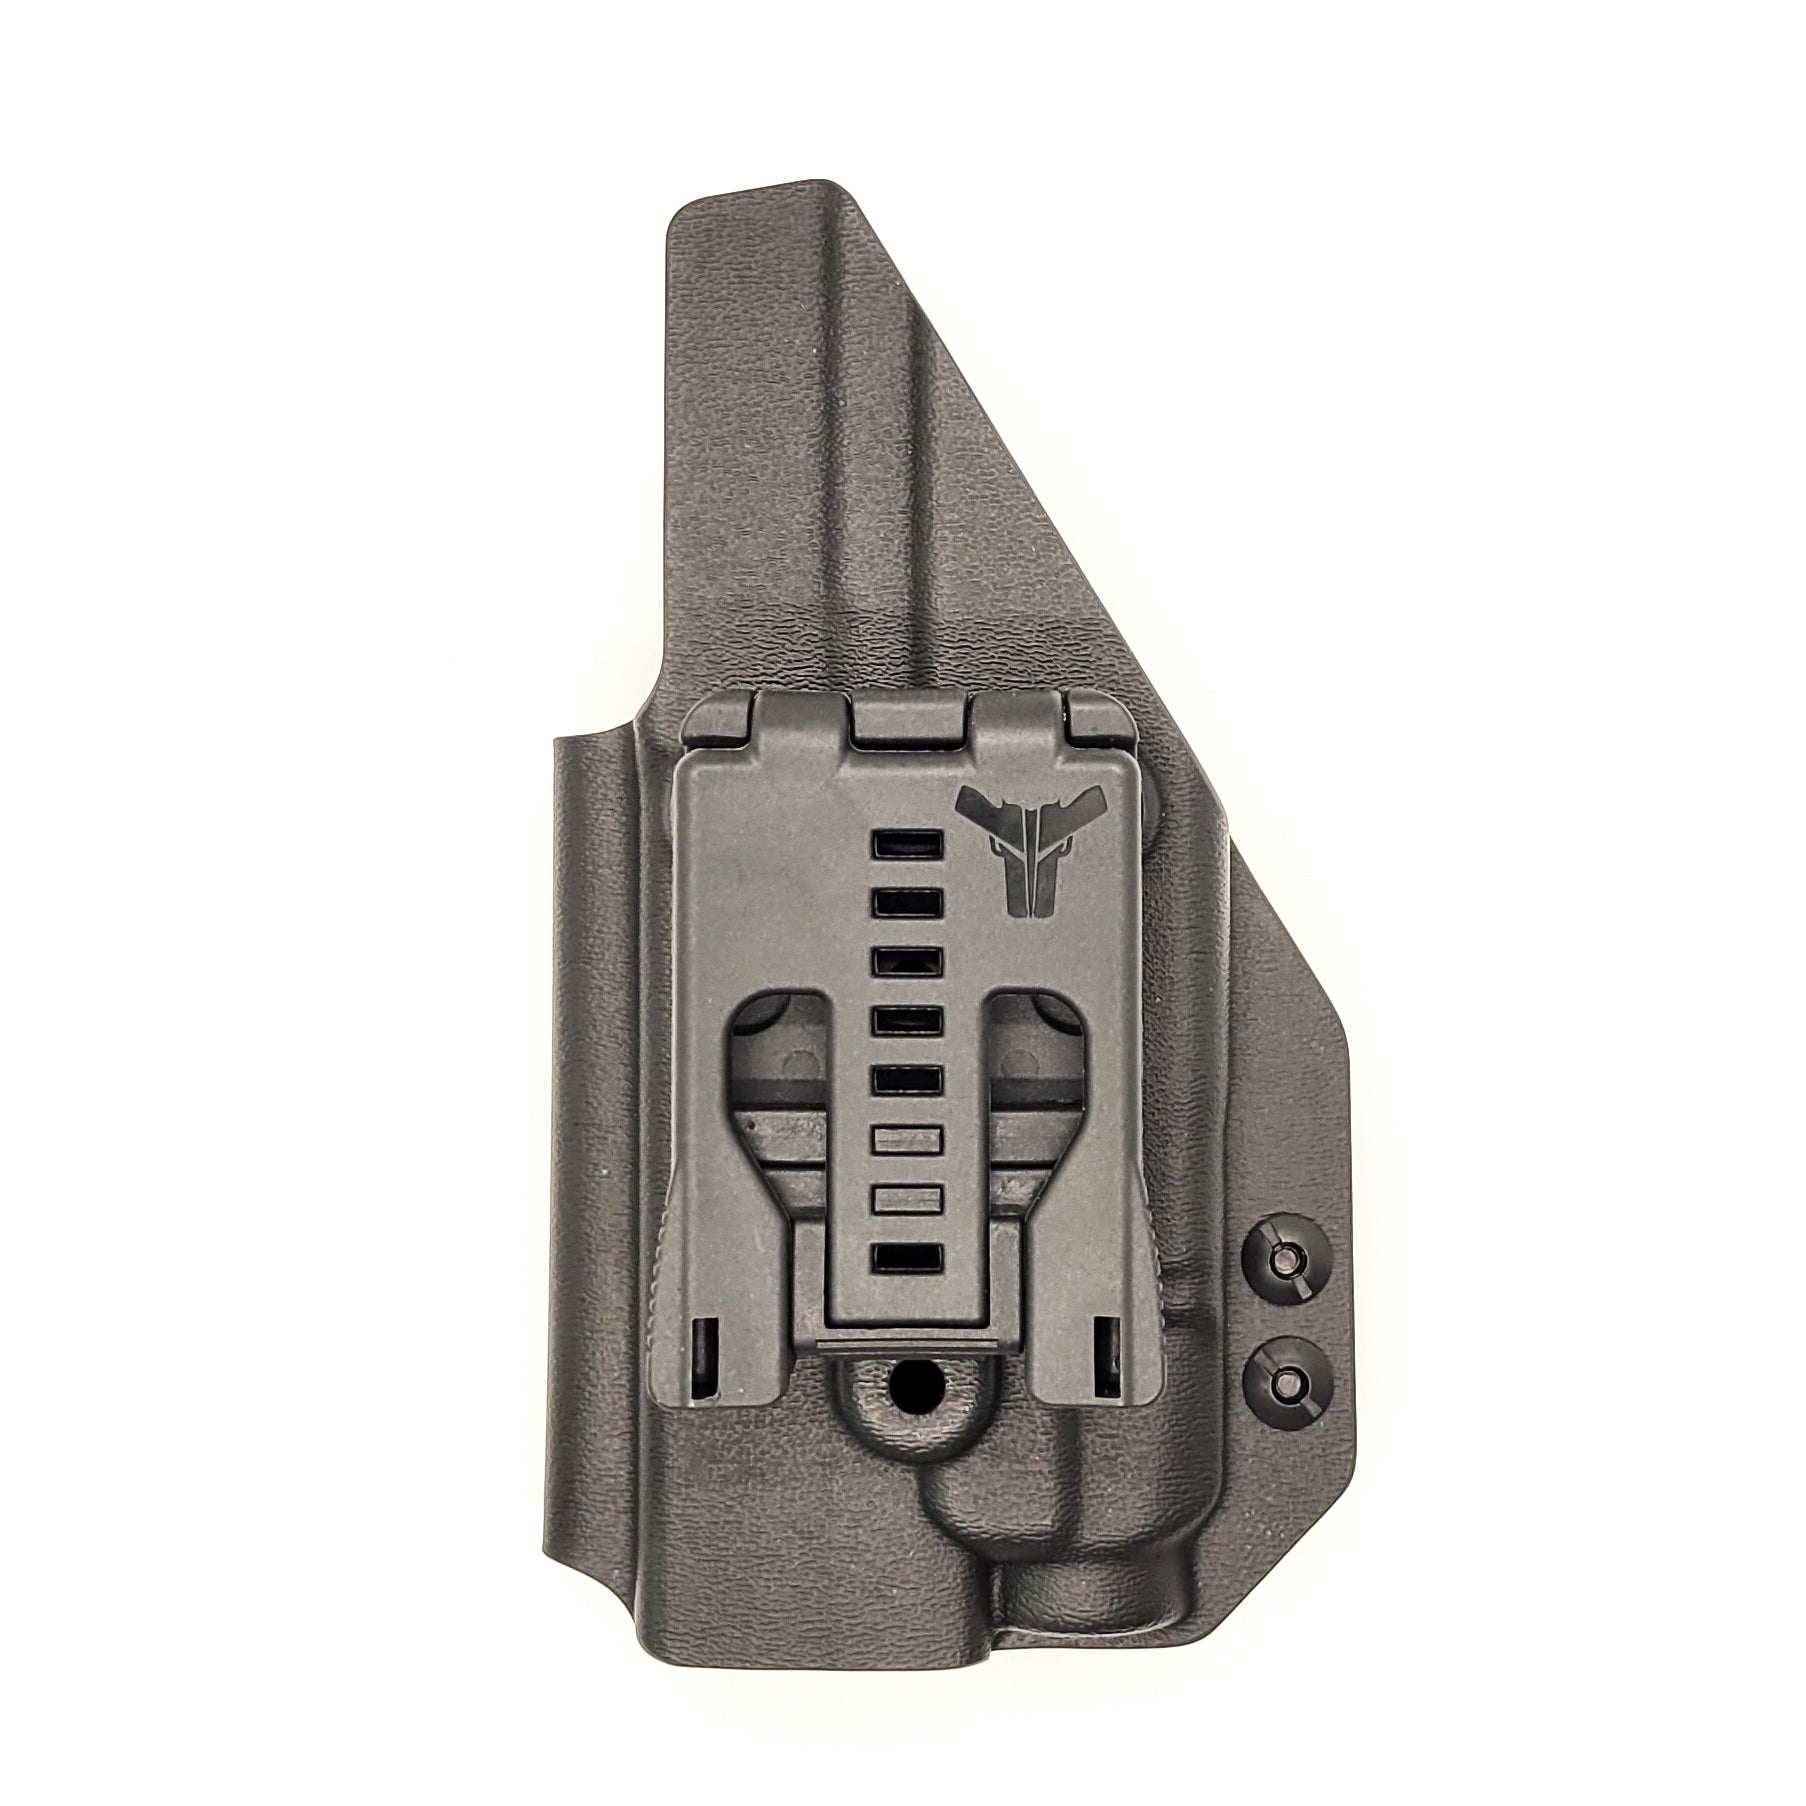 Outside Waistband Kydex Holster designed to fit the Springfield Hellcat Pro pistol with the Streamlight TLR-7 & TLR-7A light mounted to the handgun. The holster retention is on the light, not the pistol. Full sweat guard, adjustable retention, minimal material, and smooth edges to reduce printing. Made in the USA. 